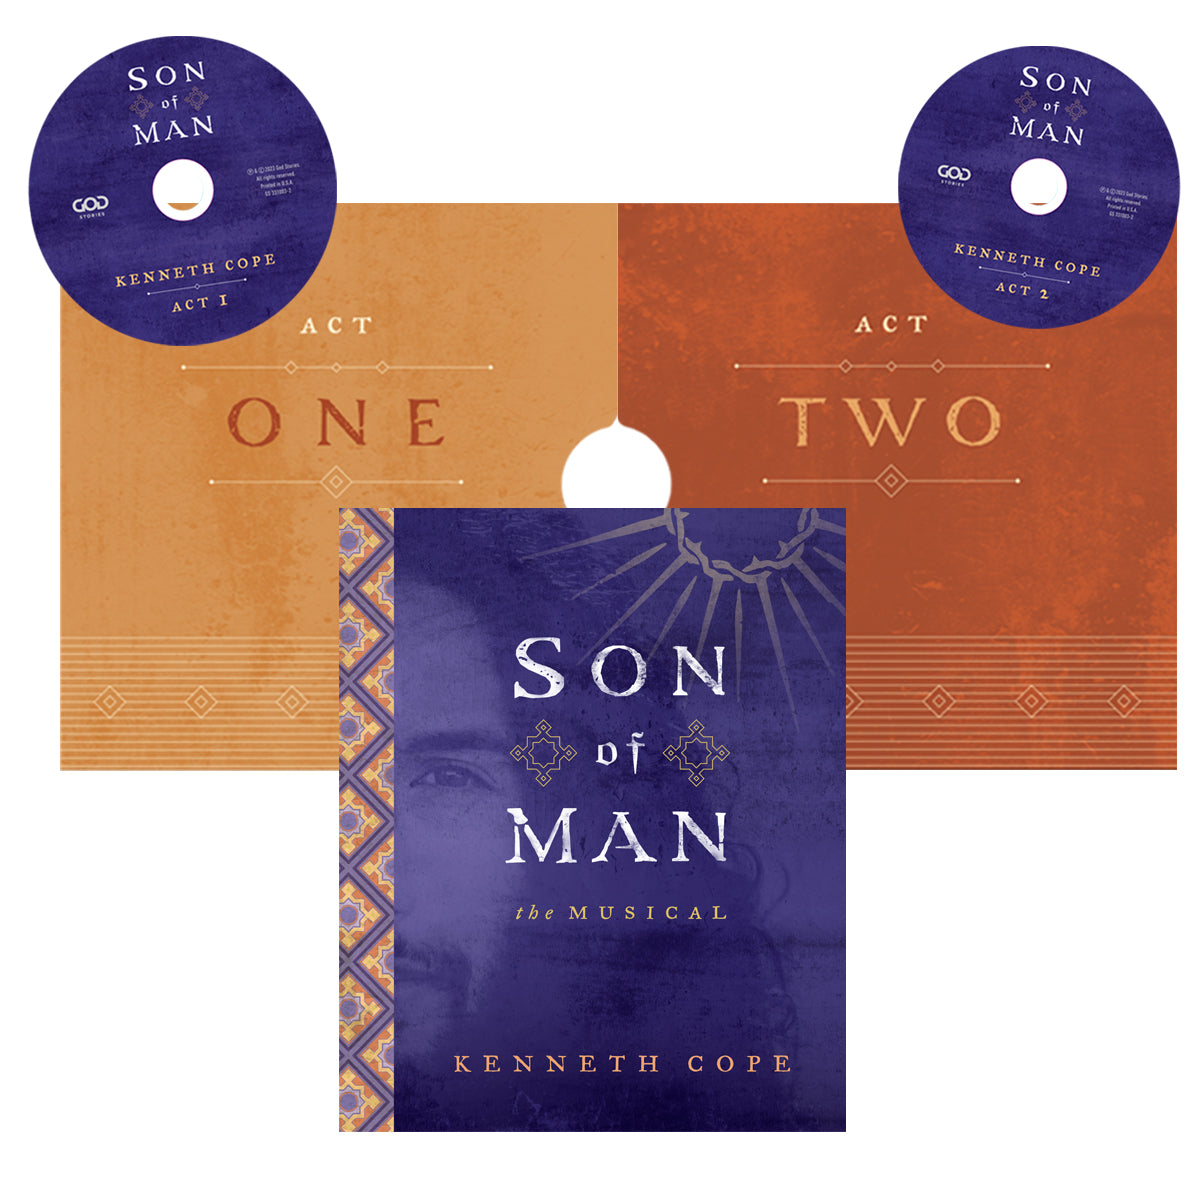 Son of Man The Musical Book, Audio Download and CDs